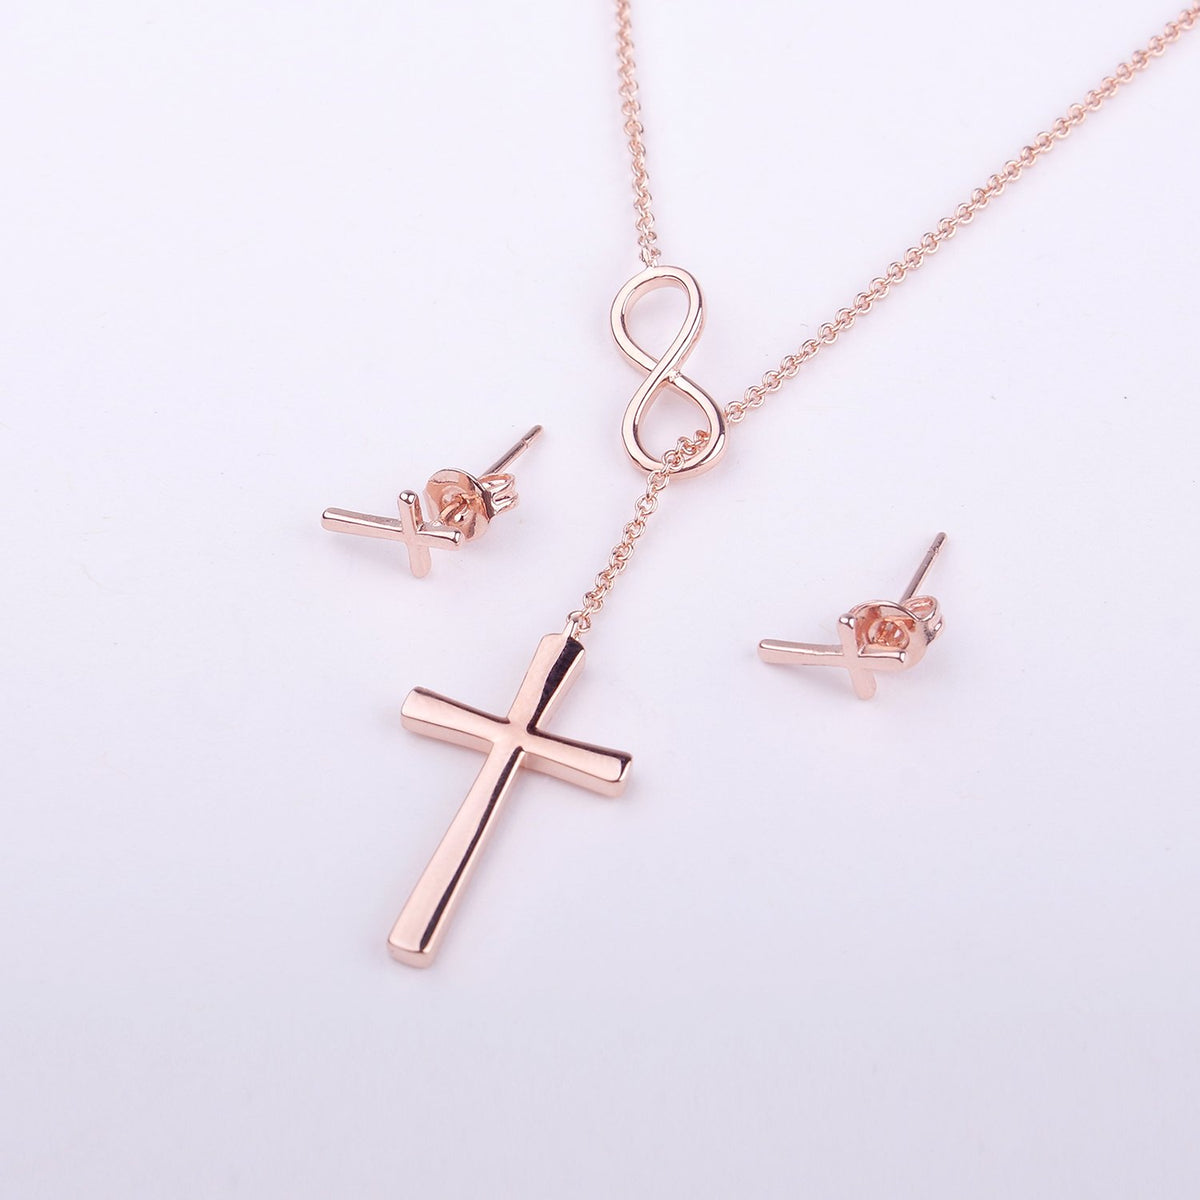 Christmas Gift for Sister Cross earring and Necklace Set Jewelry Set